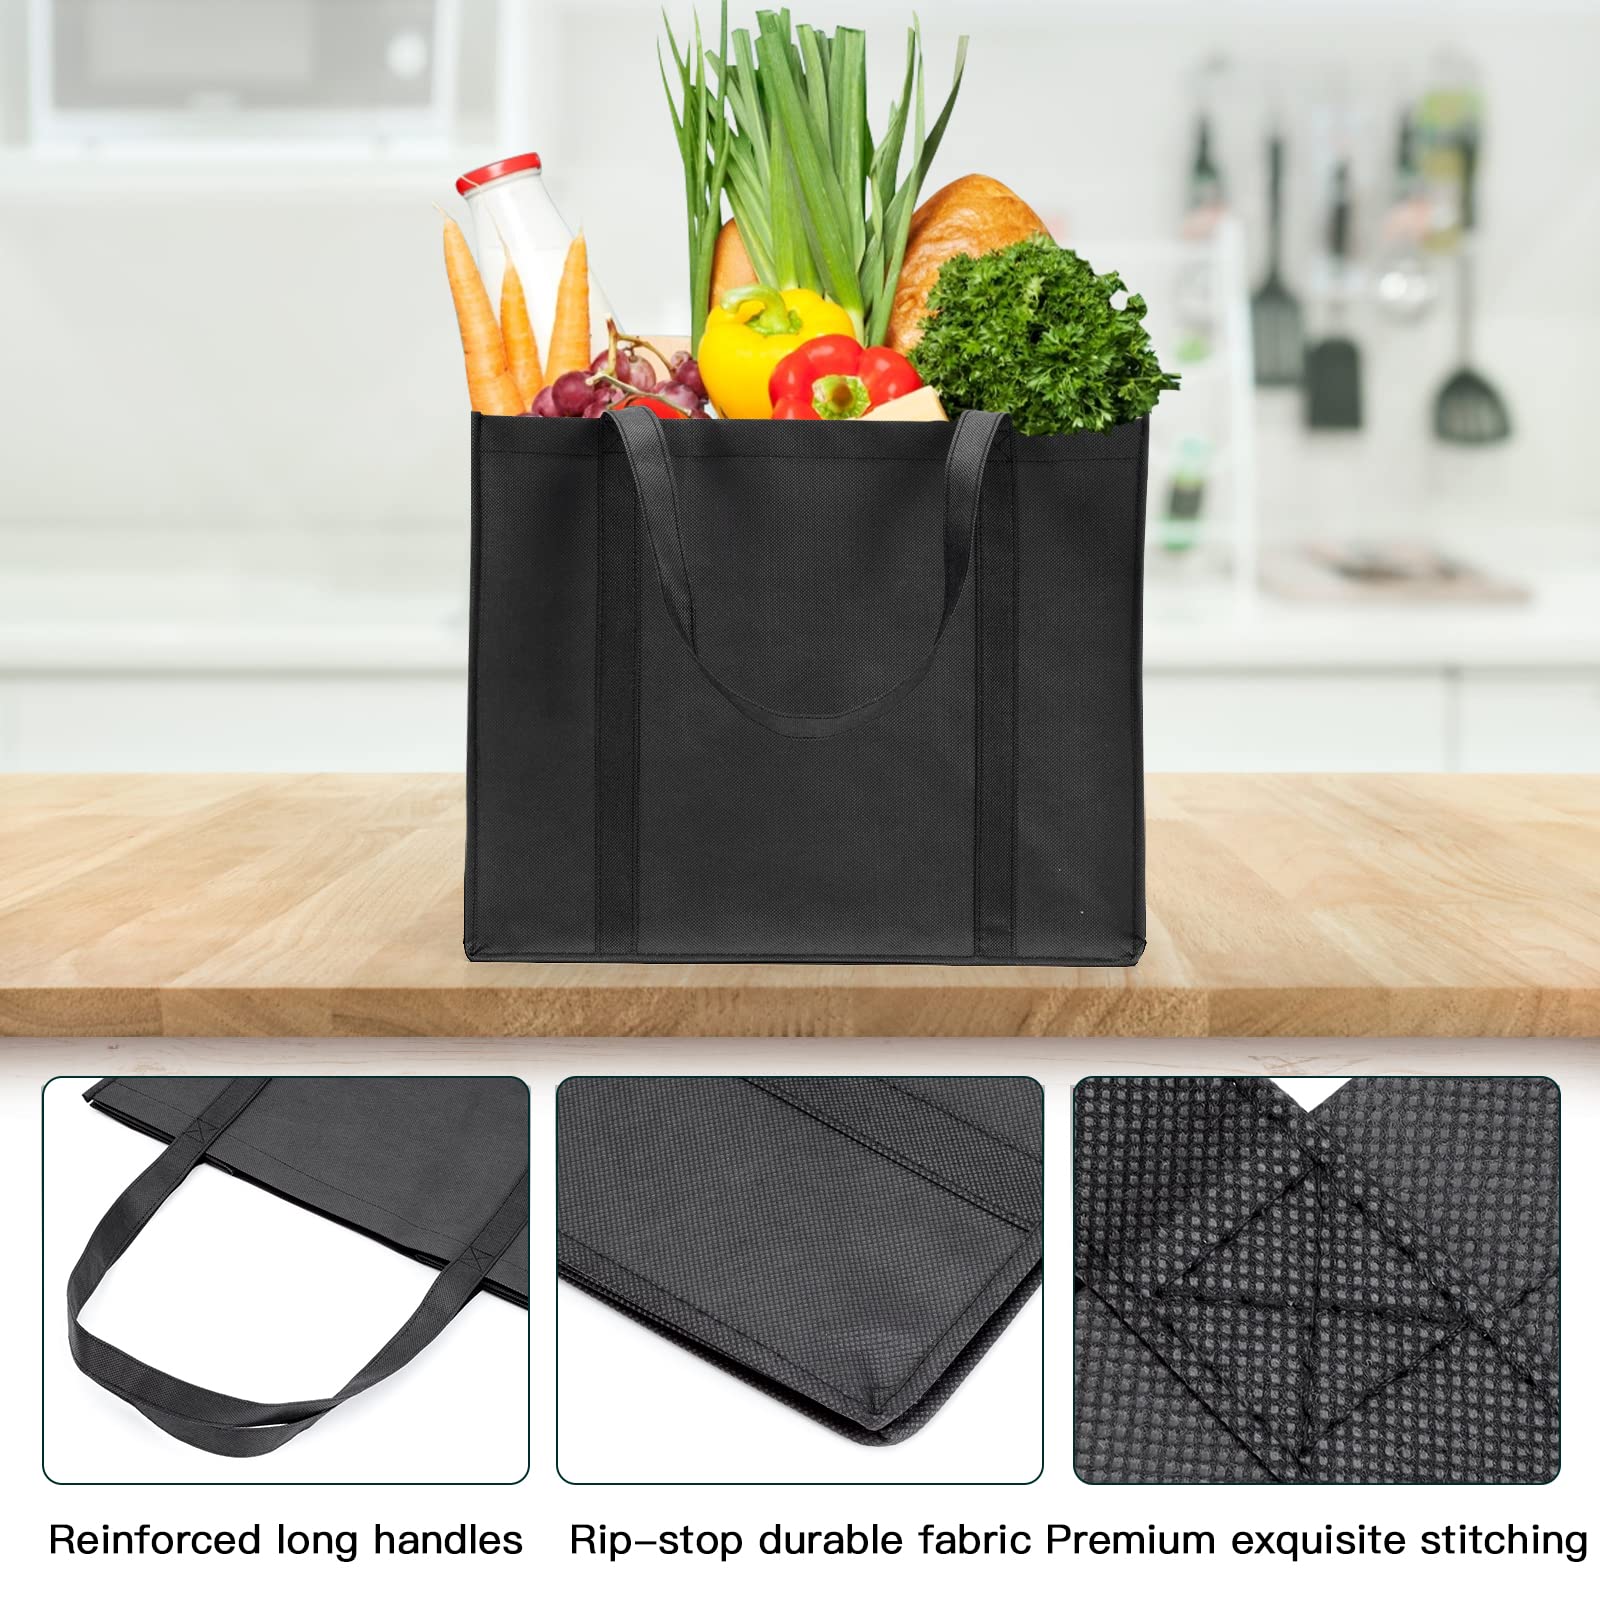 HECTOLIFE 20-Pack Reusable Grocery Bags，Large Washable Foldable Shopping Bags，Heavy Duty Tote Bags with Reinforced Handles(Black and Grey)